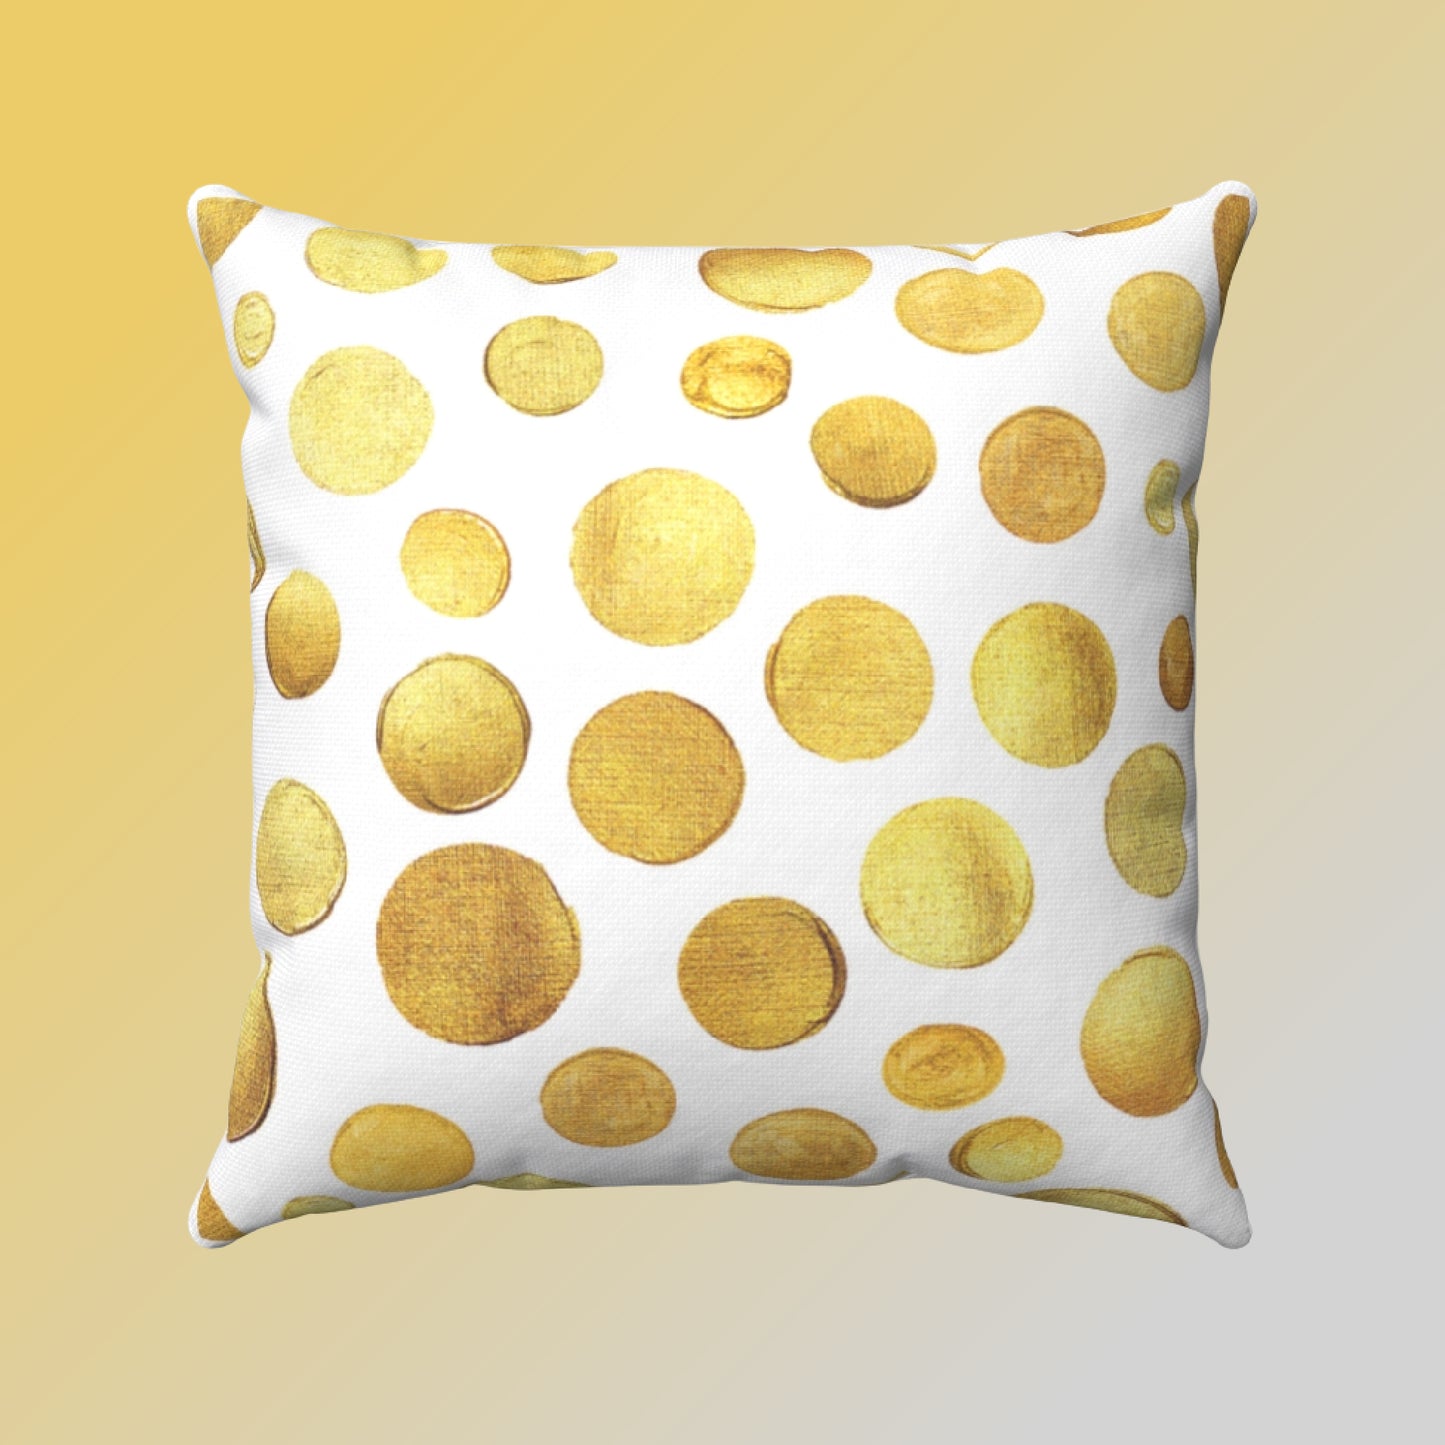 Front and back view of our pillow case featuring glittering gold round  disks in various sizes